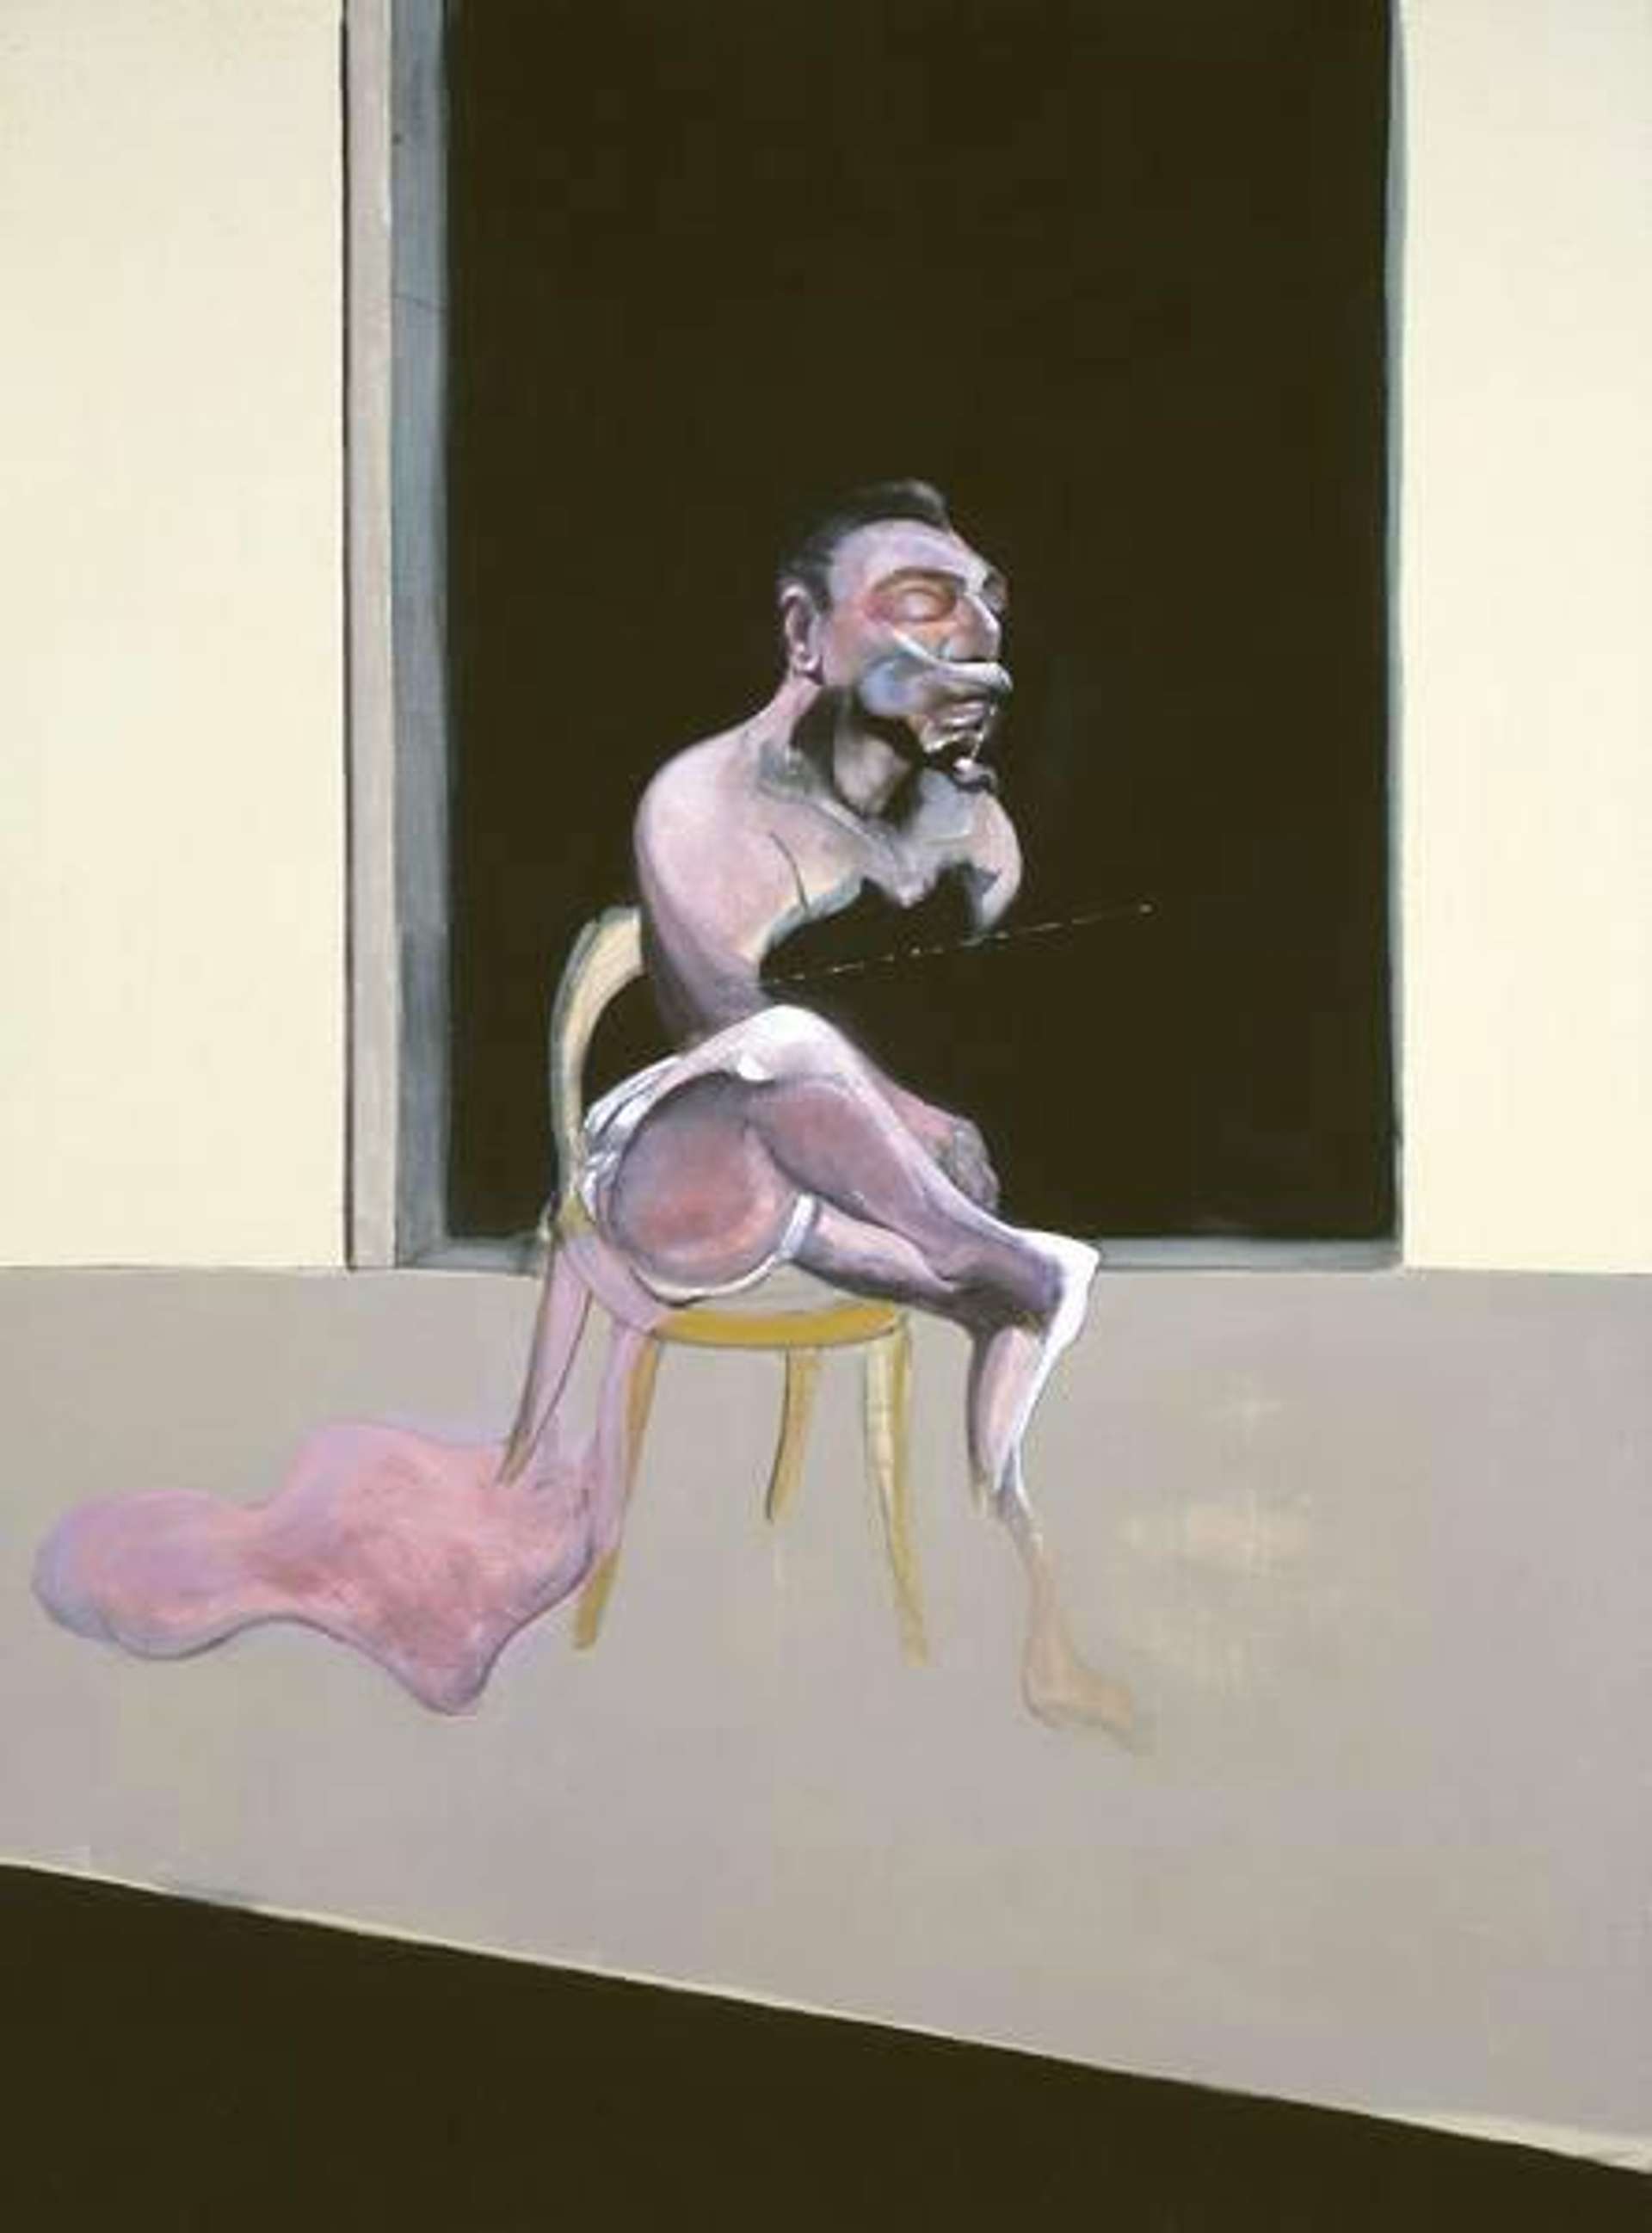 Man sitting in a chair with his legs crossed, melting into the ground beneath him